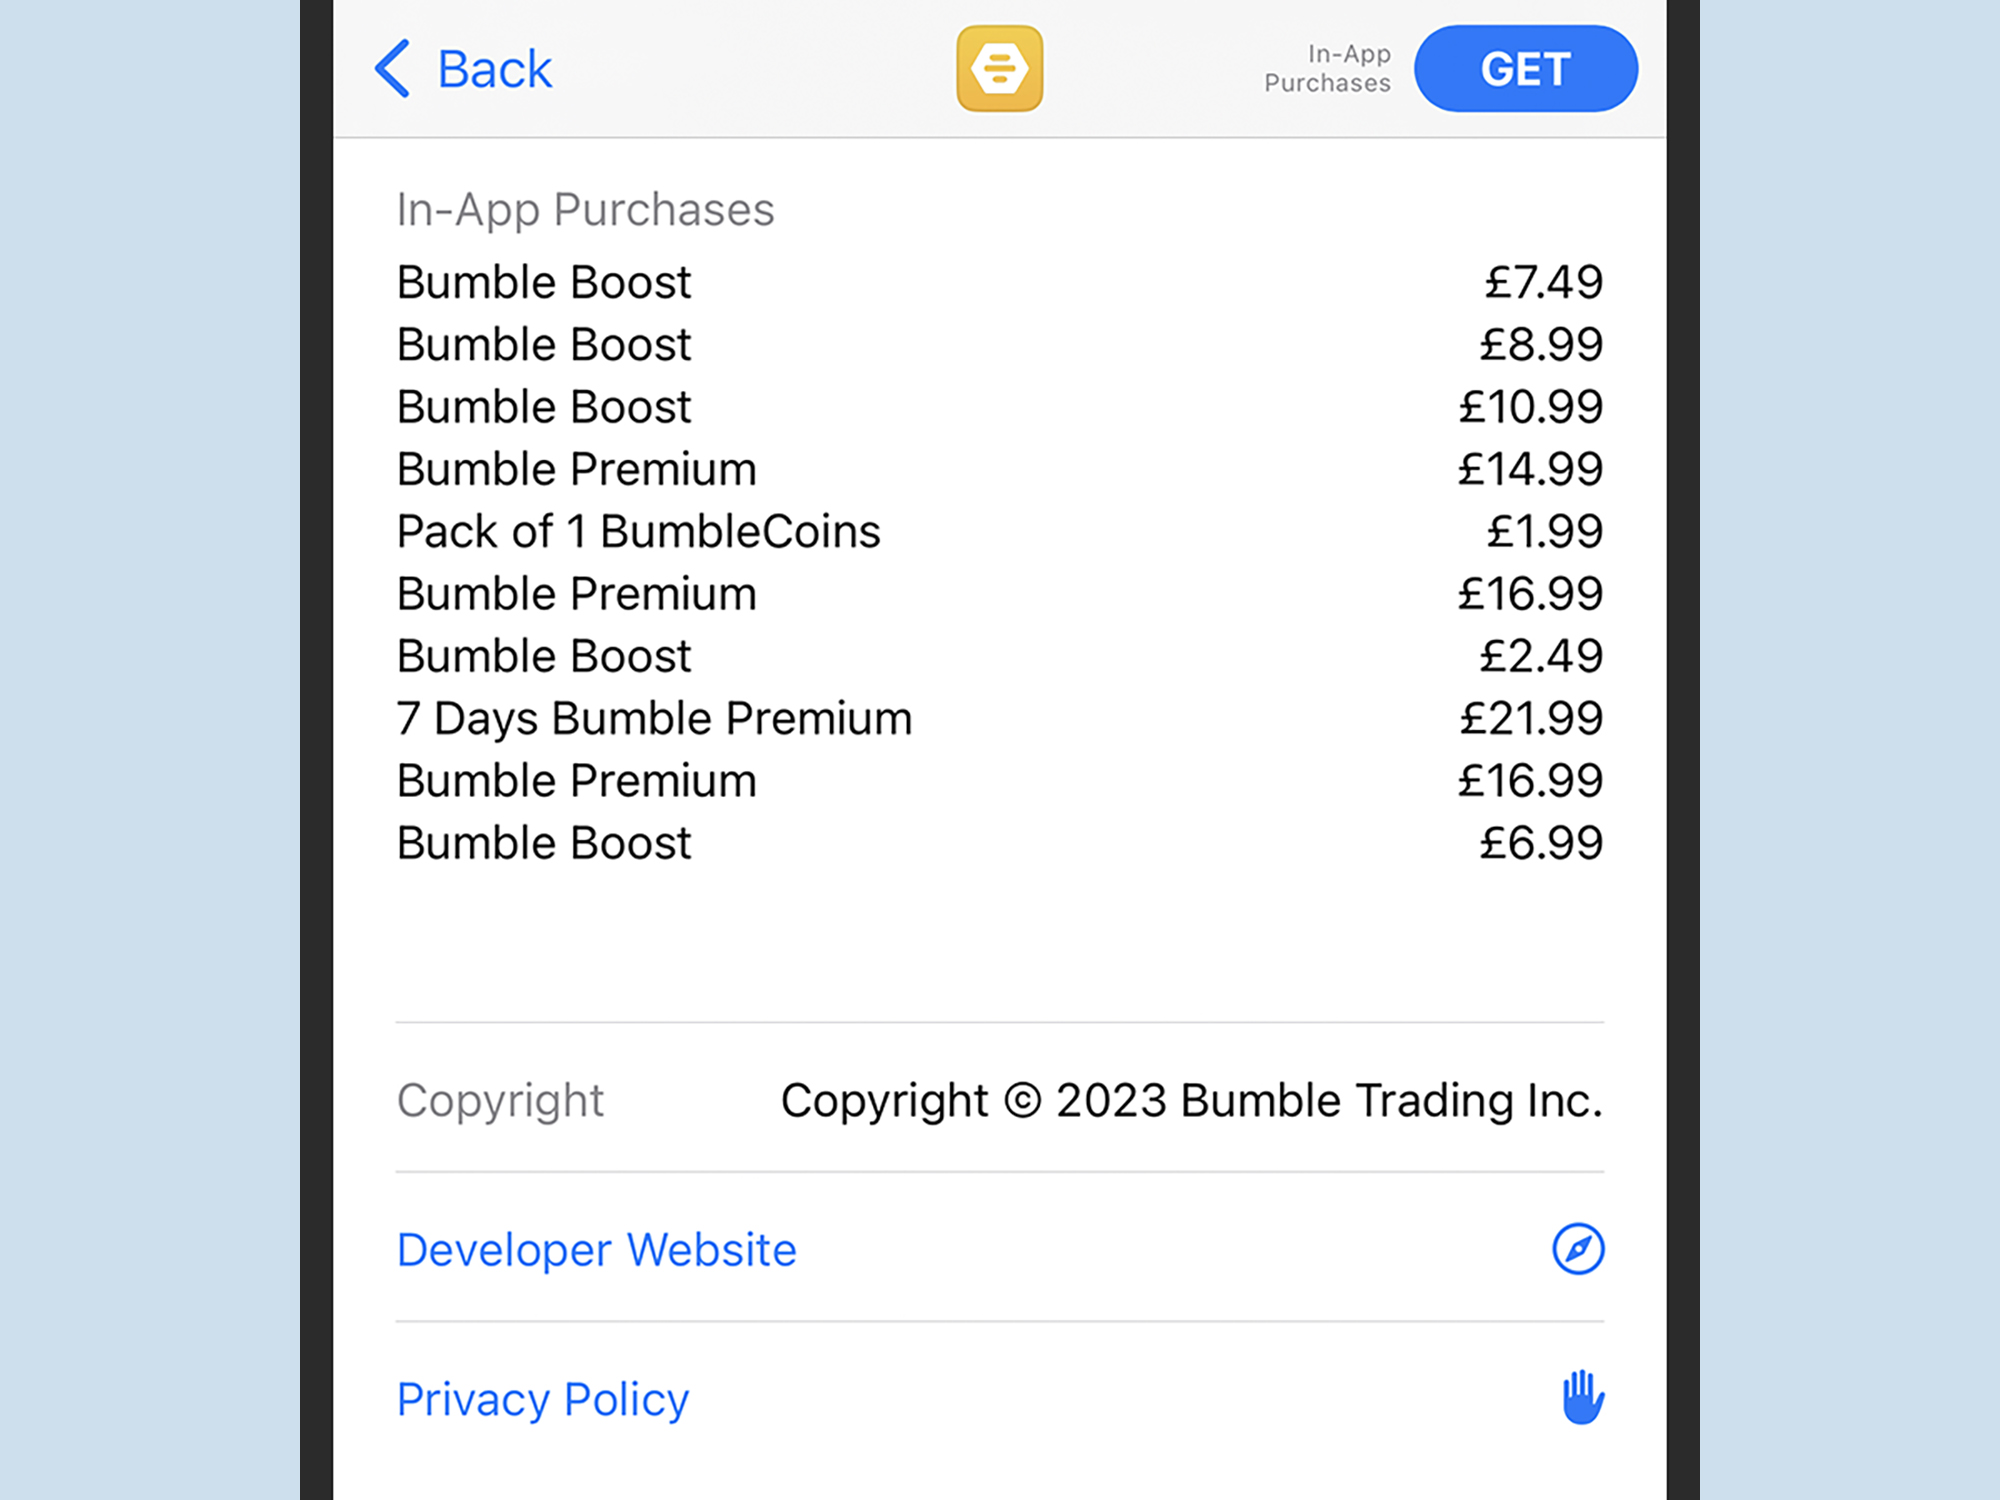 The in-app pricing list for Bumble.